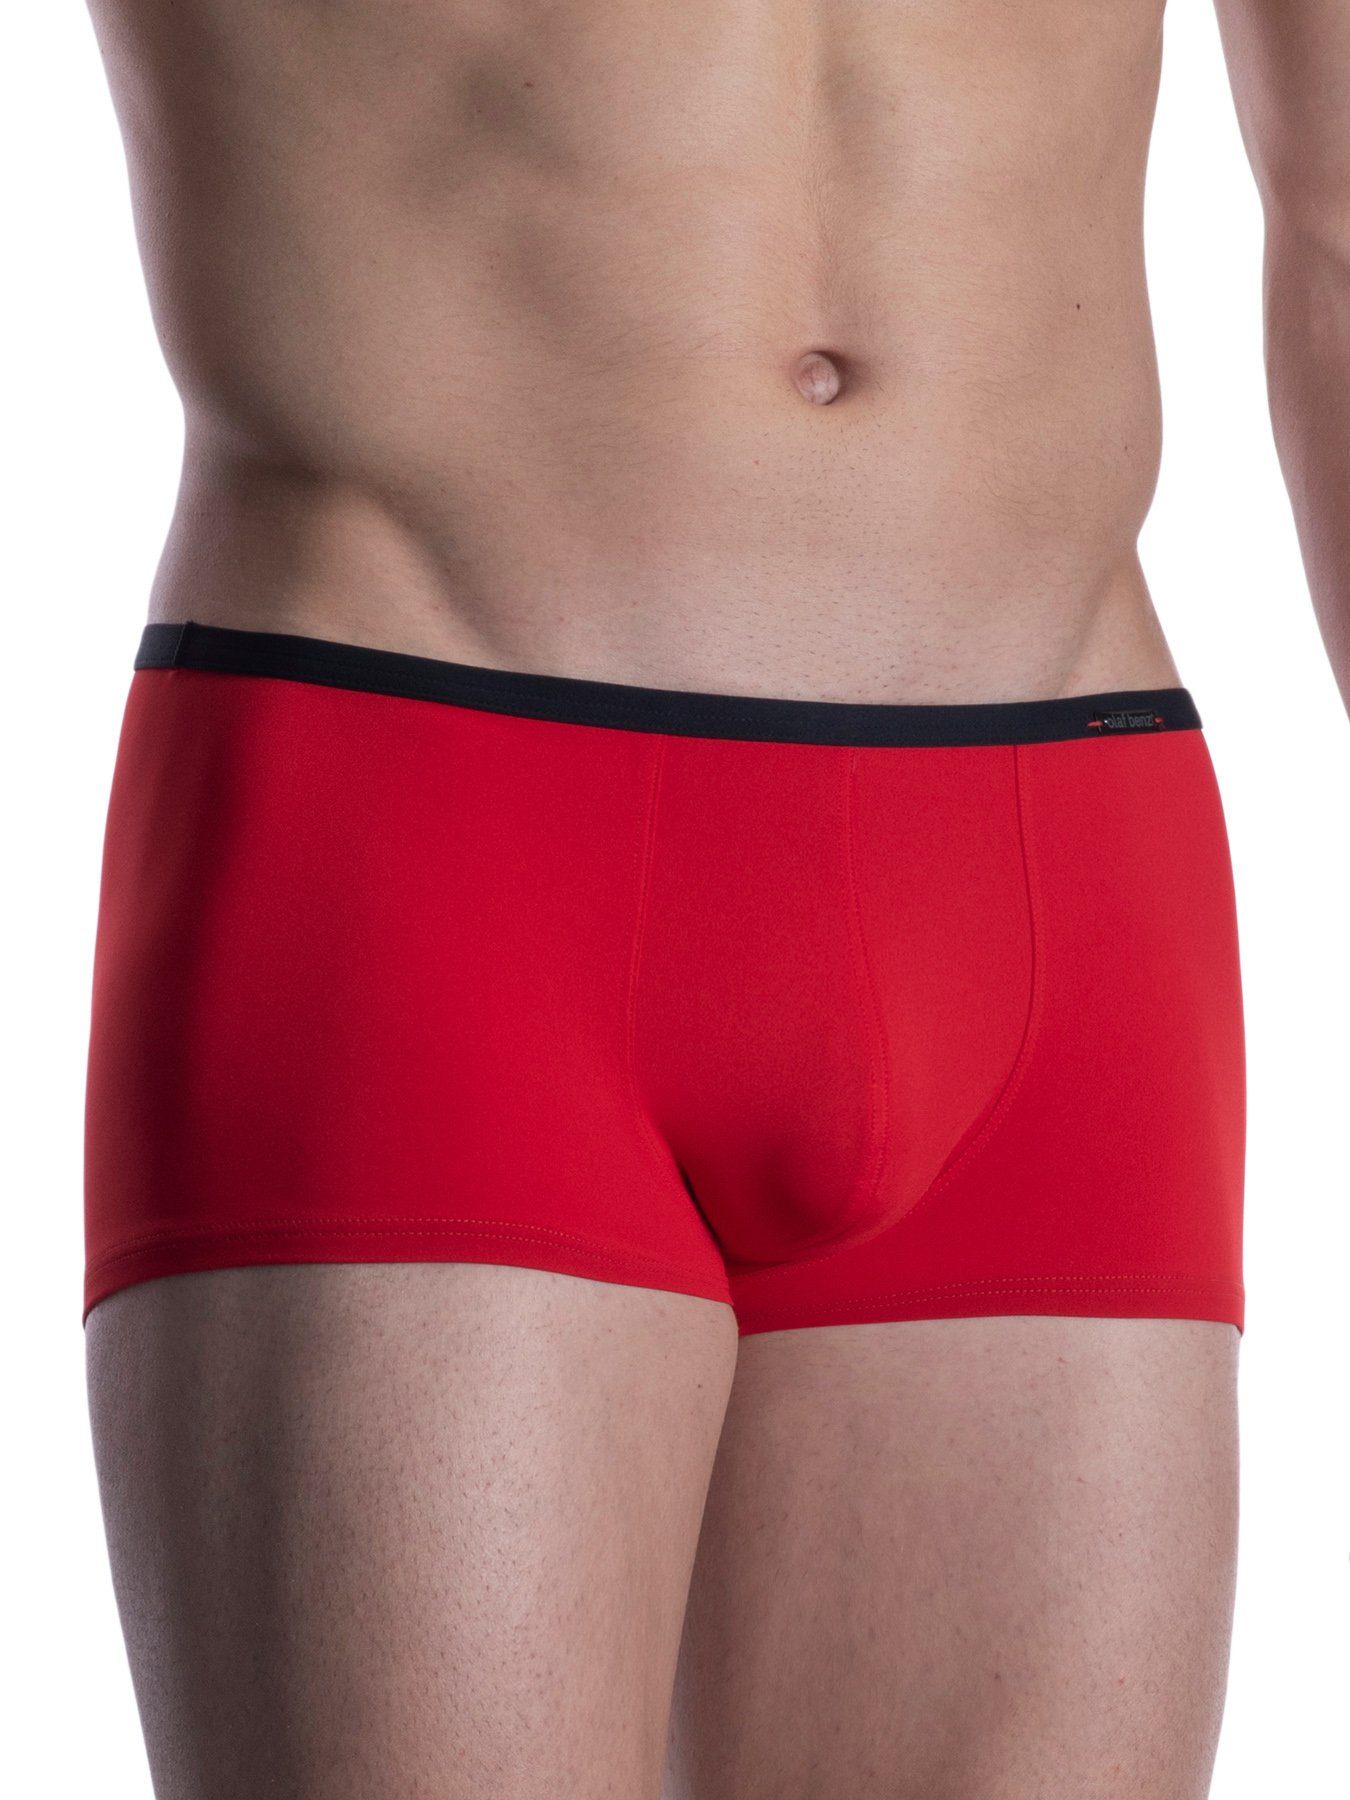 Olaf Benz Retro Pants Olaf Benz RED2004 Minipants red